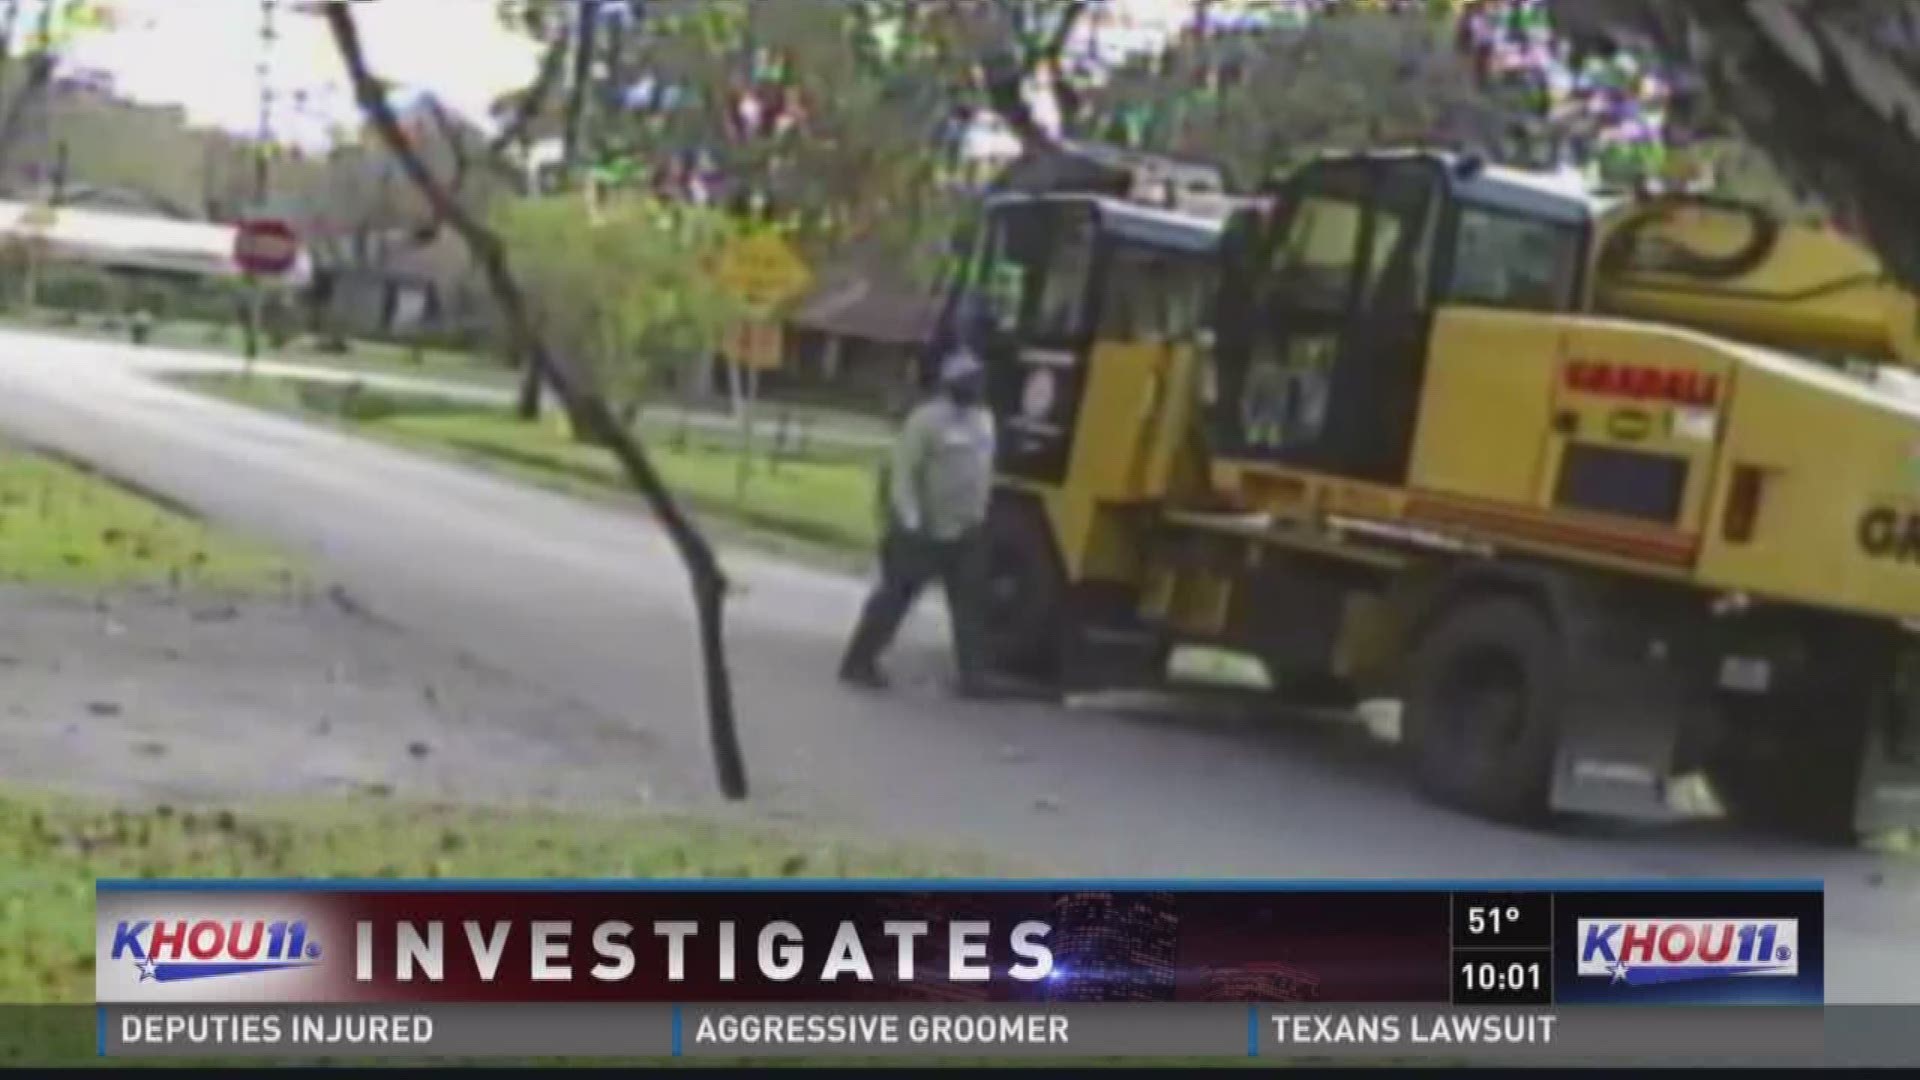 KHOU 11 Investigates reviewed thousands of personnel records and found city workers often get a long leash to goof off and screw up, while still earning a paycheck on the taxpayers' dime.